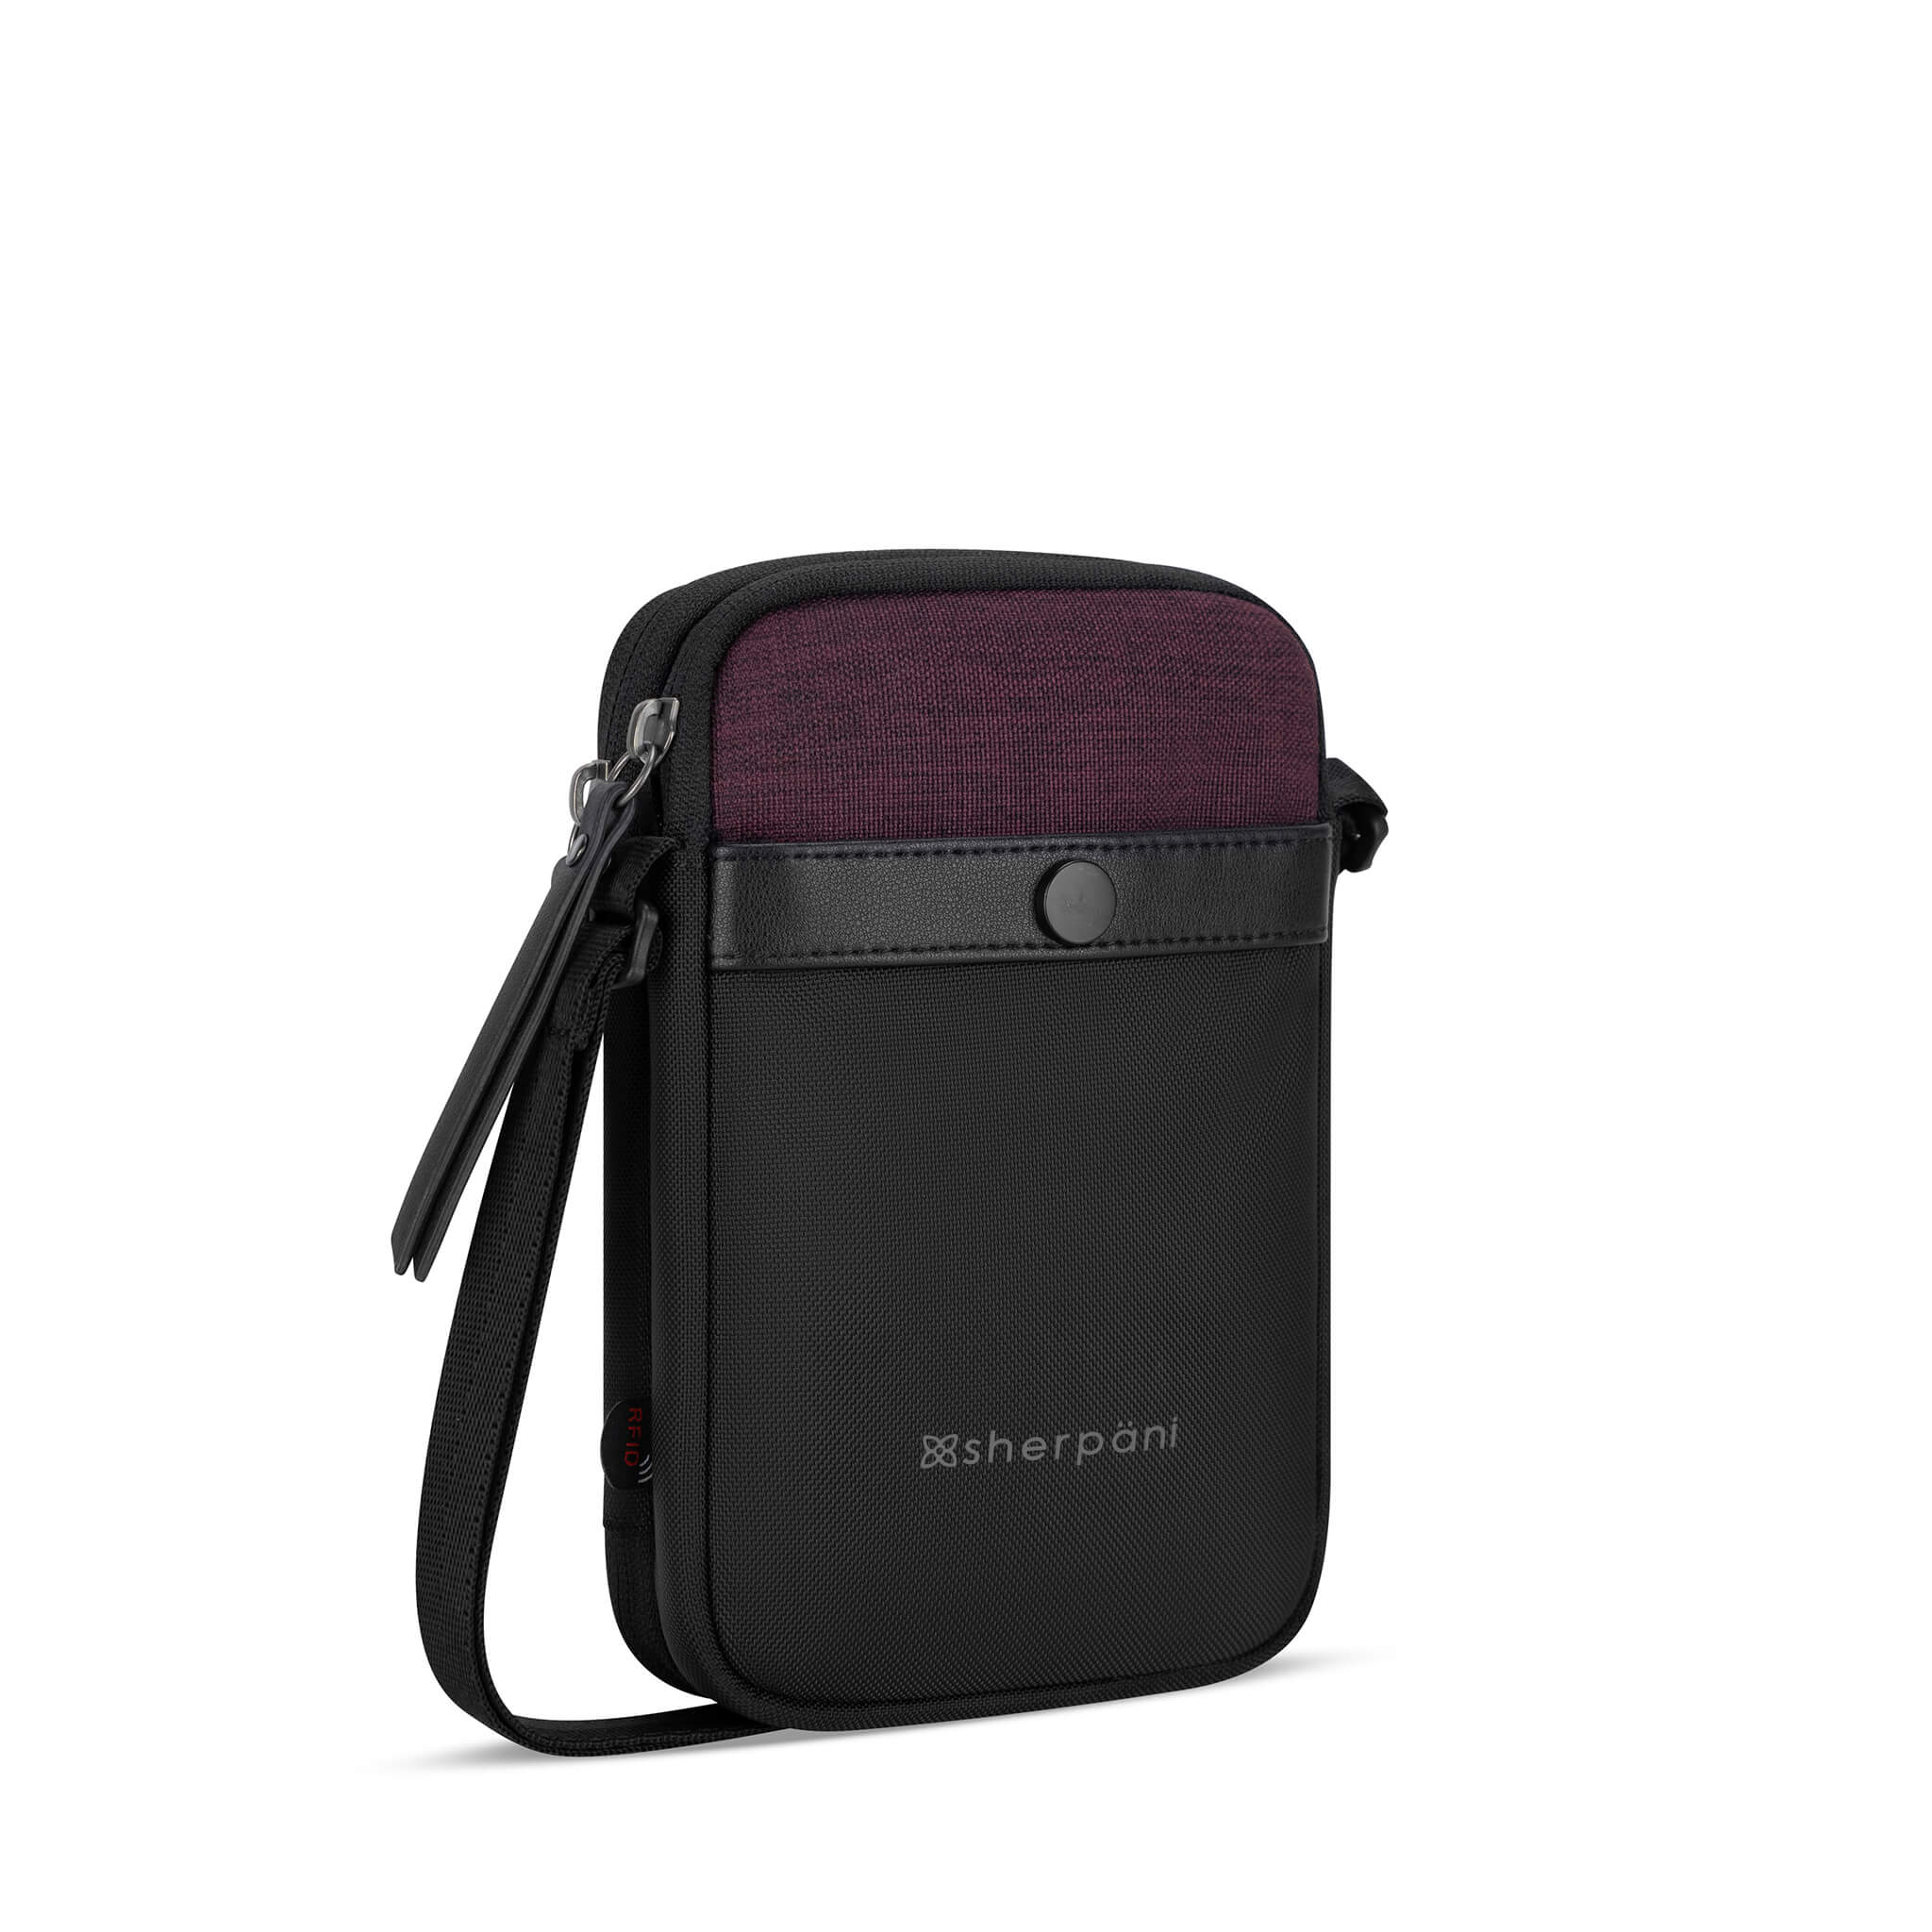 Angled front view of Sherpani crossbody wallet, the Simplicity in Merlot. The simple and minimalist bag includes anti-theft features and an adjustable crossbody strap. 